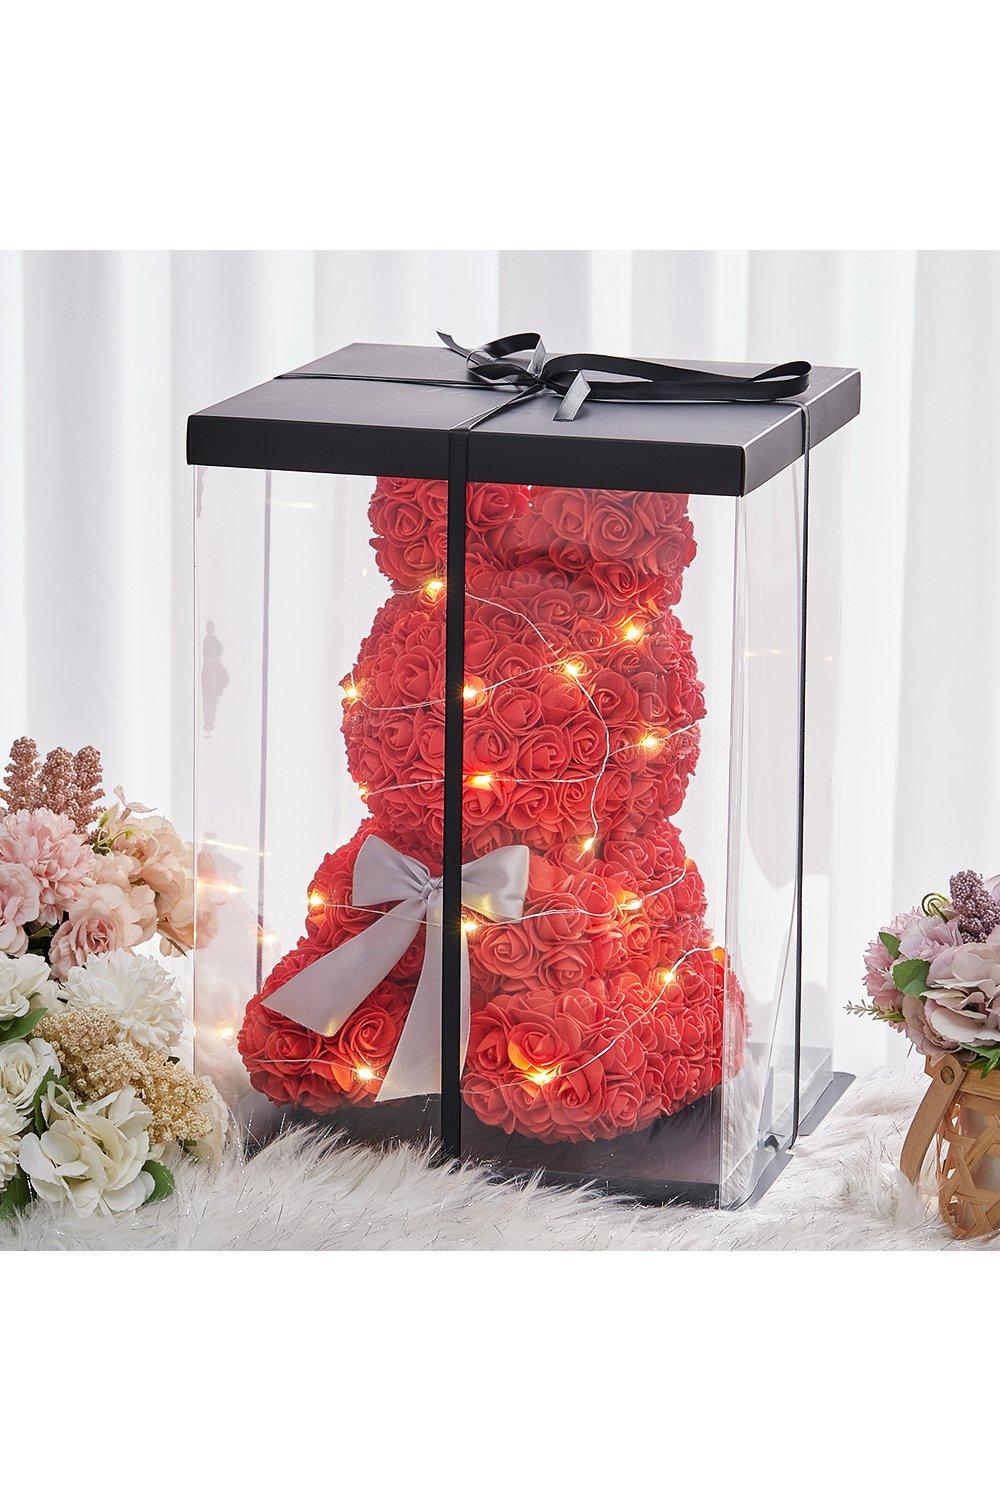 Rose Rabbit Gift Box with LED Lights for Valentine's Day